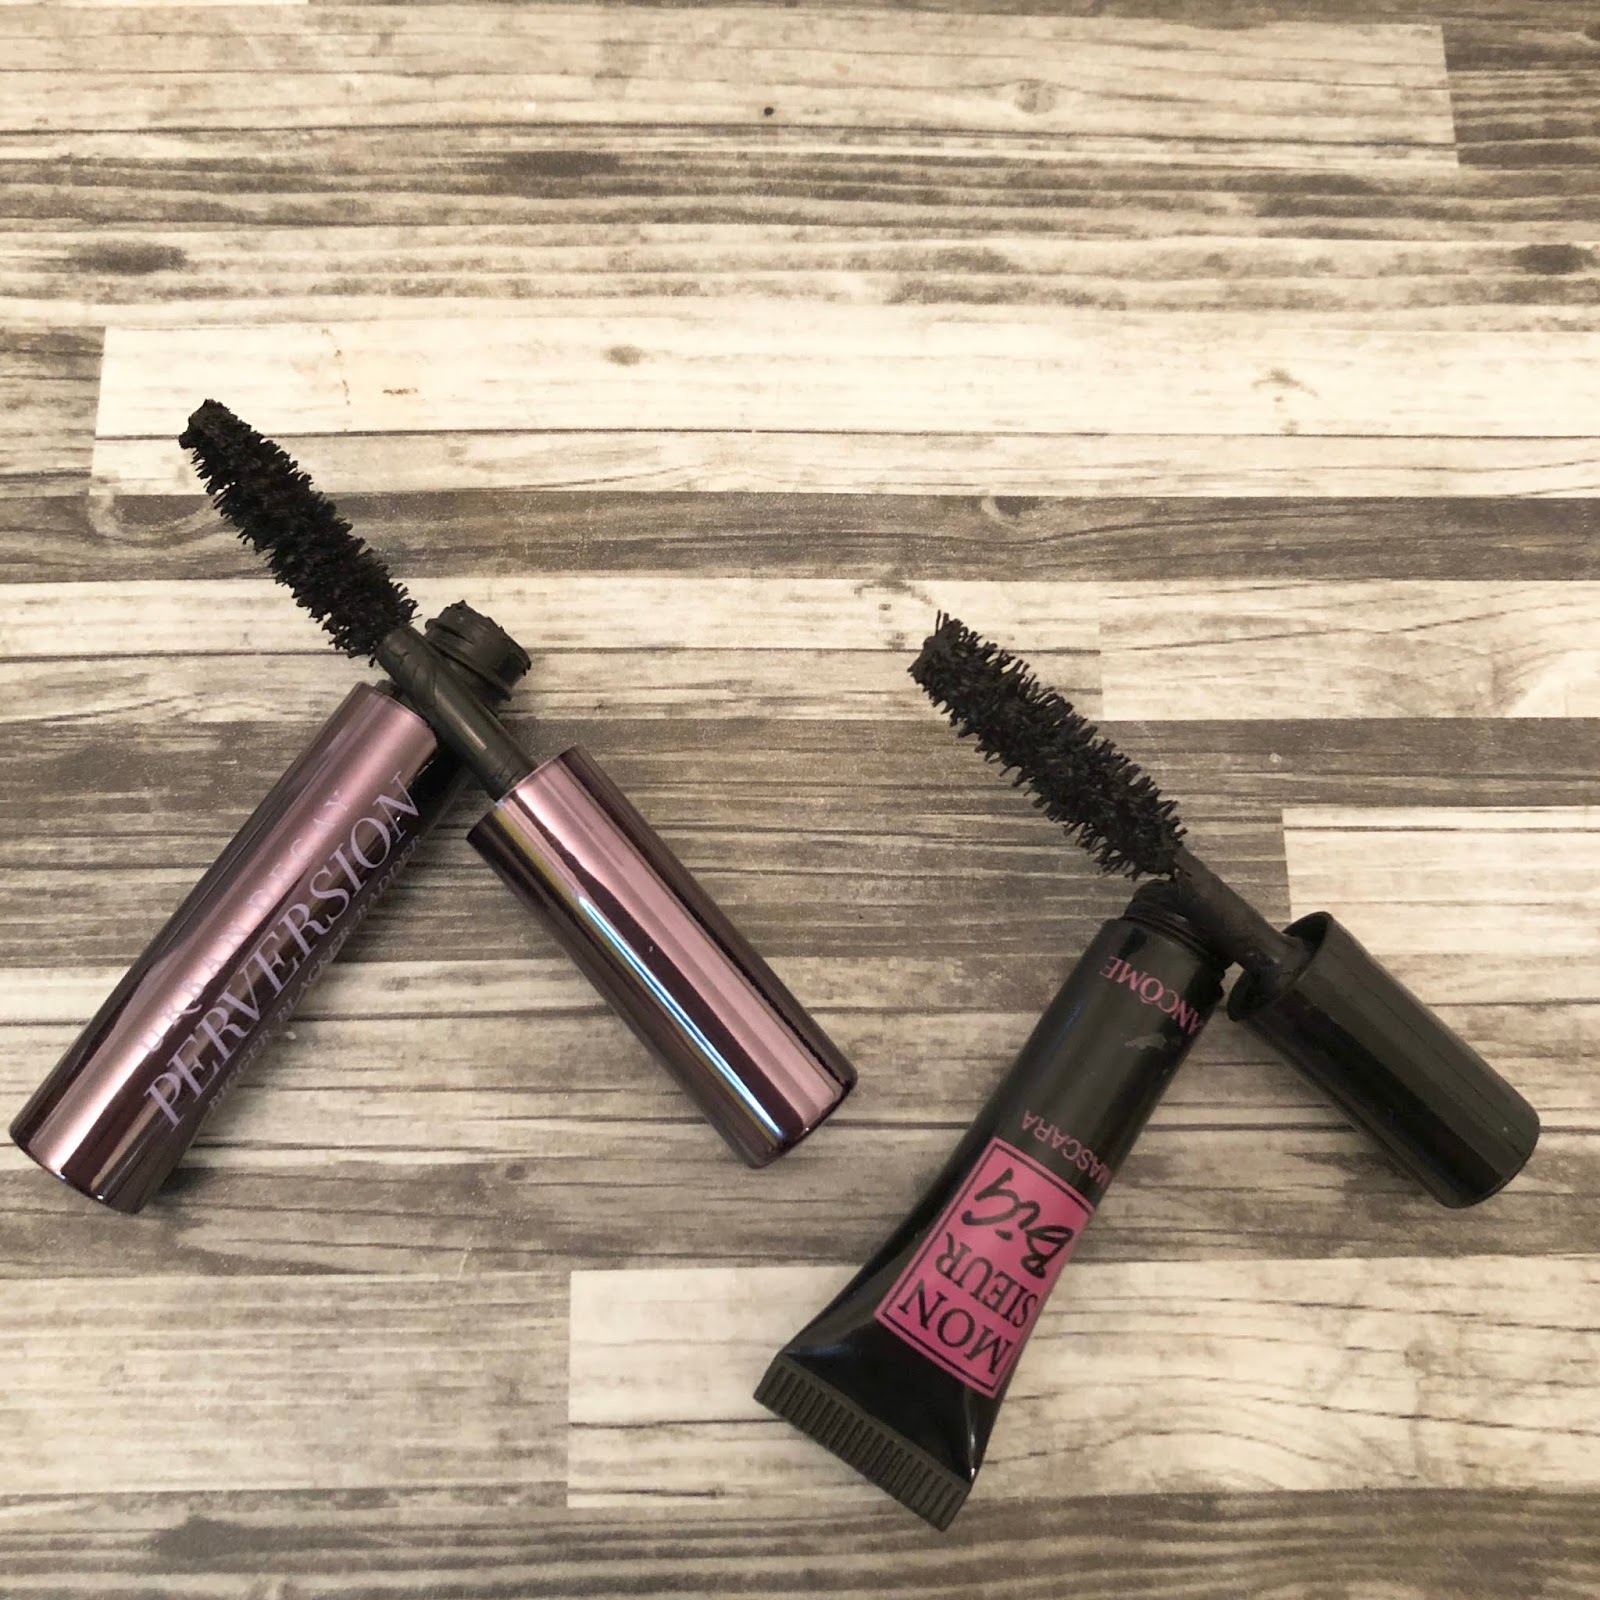 spirit Post Cane Urban Decay Perversion Mascara VS Lancome Monsieur Big Mascara (I Tried Two  Samples, Which One Would I Buy) - Little Corner Of Mine